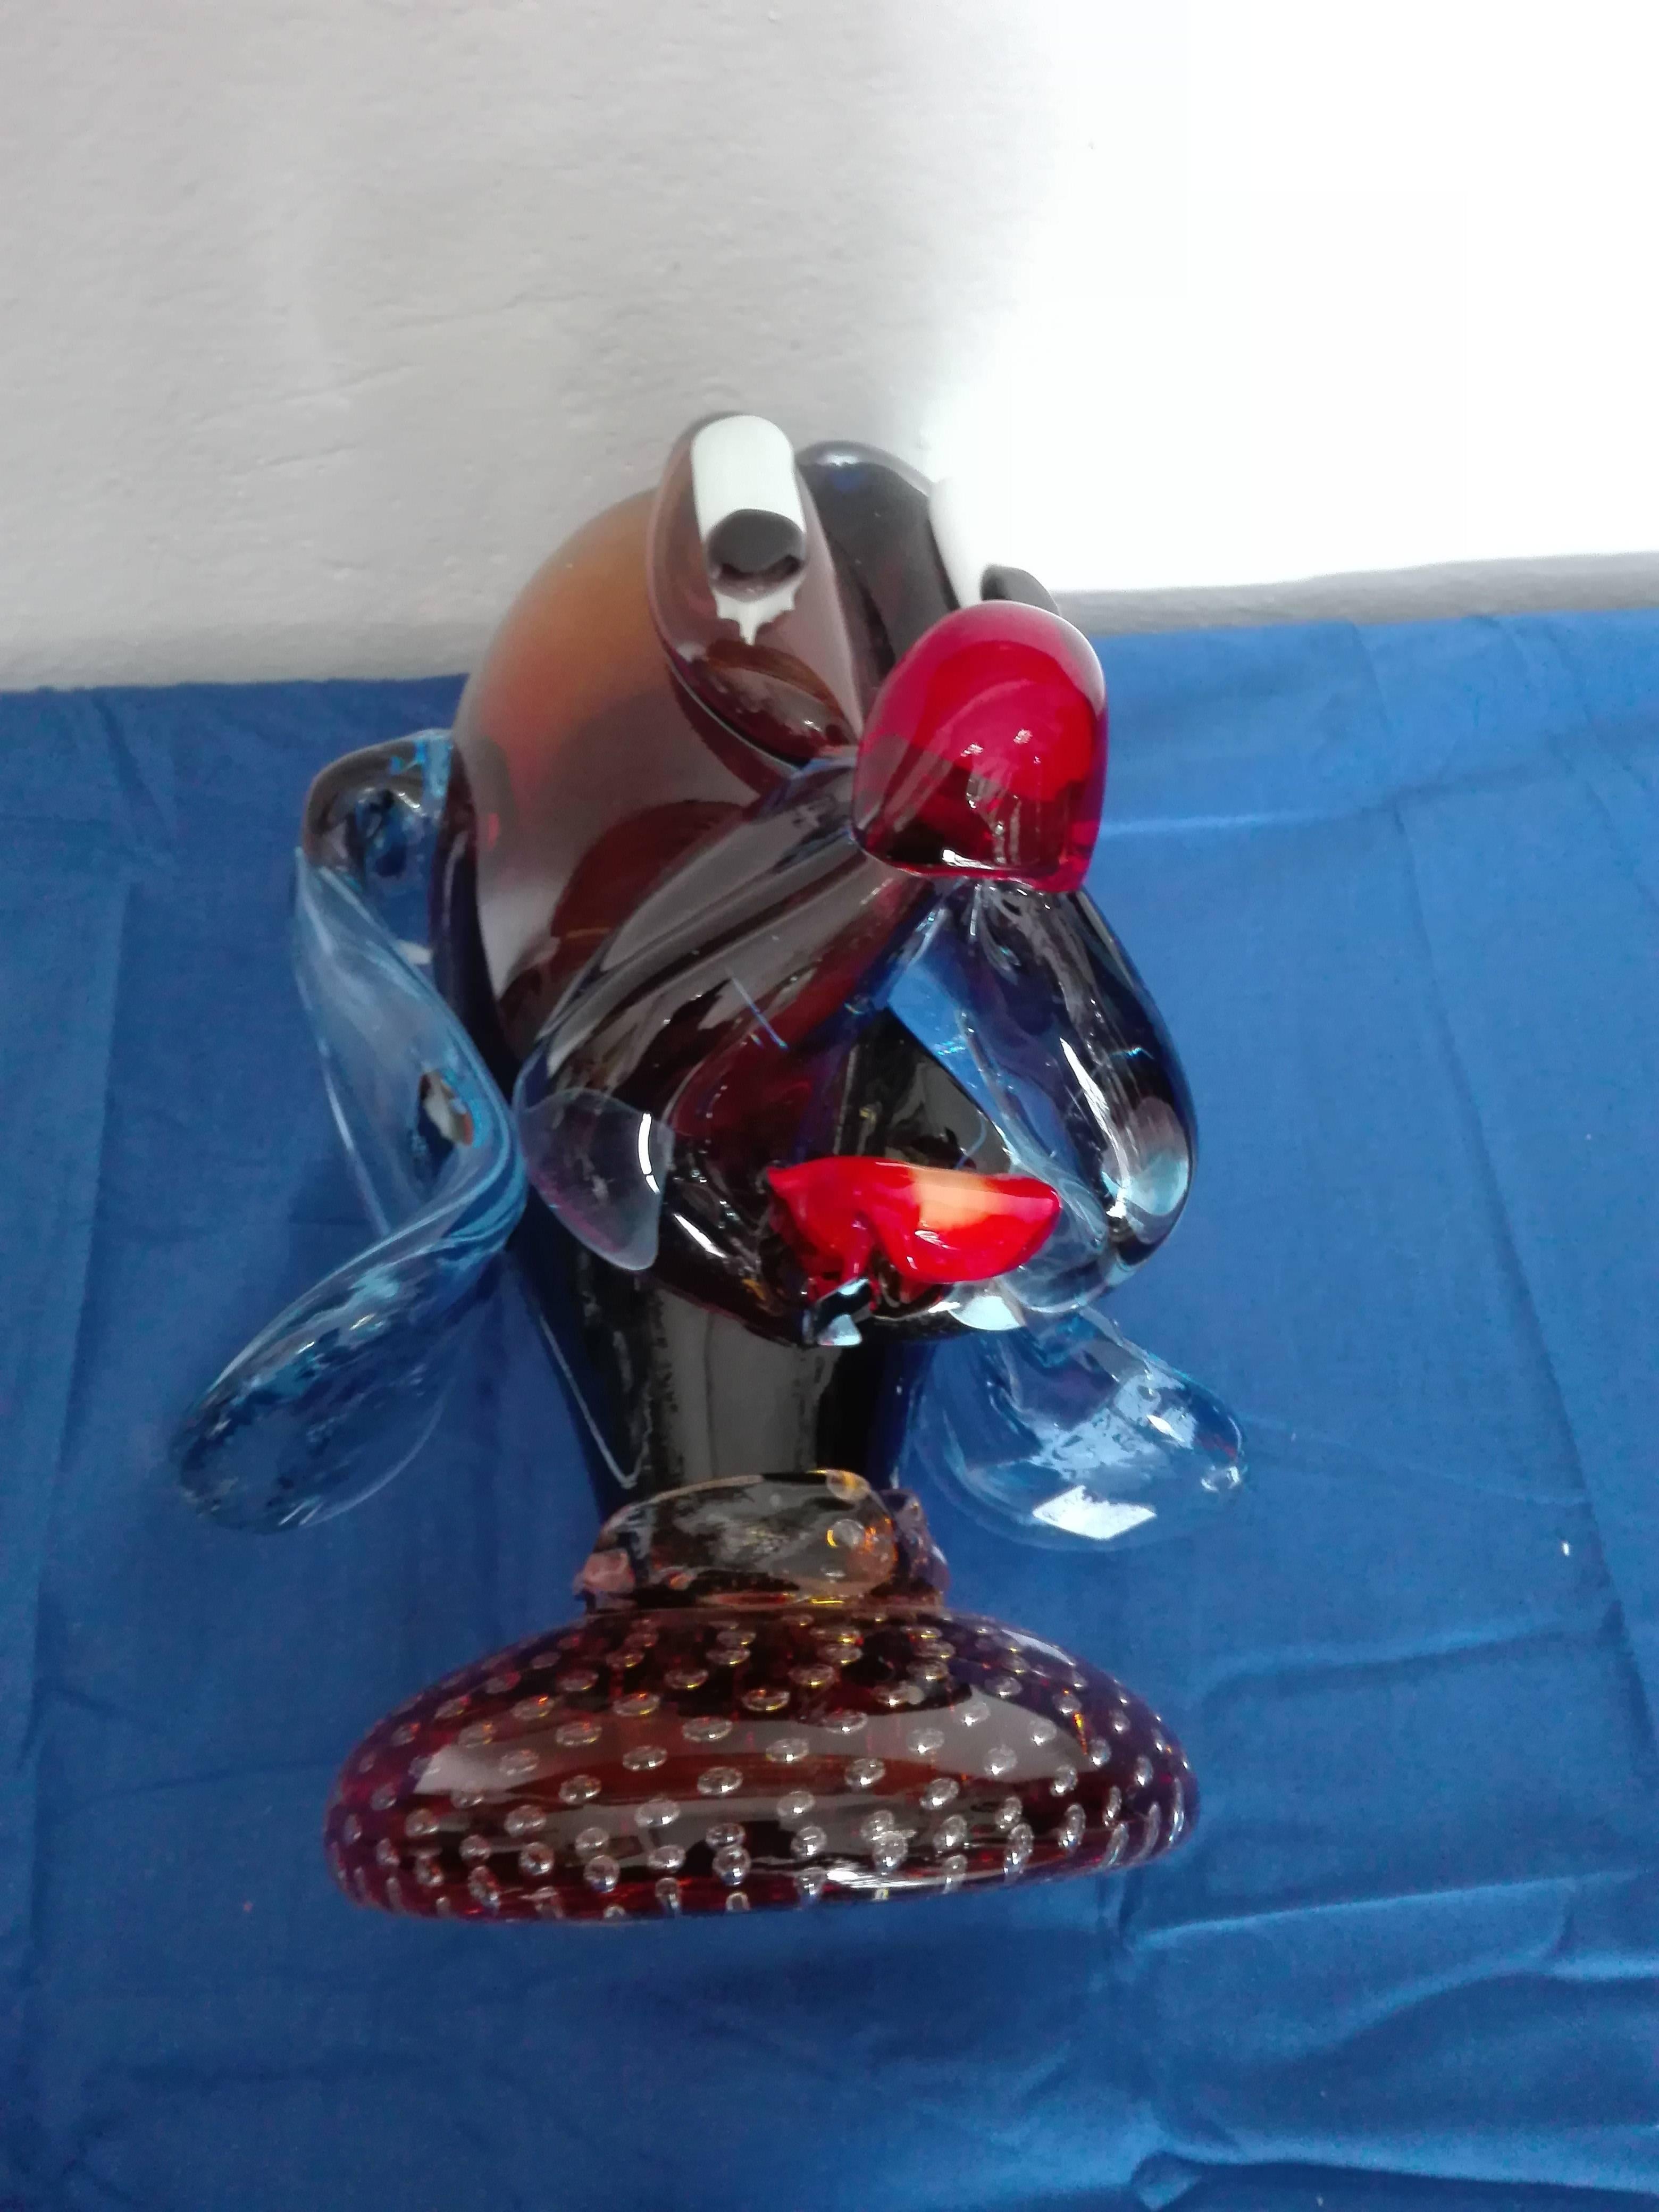 Perfect condition, free-from any kind of damage. The head is attached to a glass base.